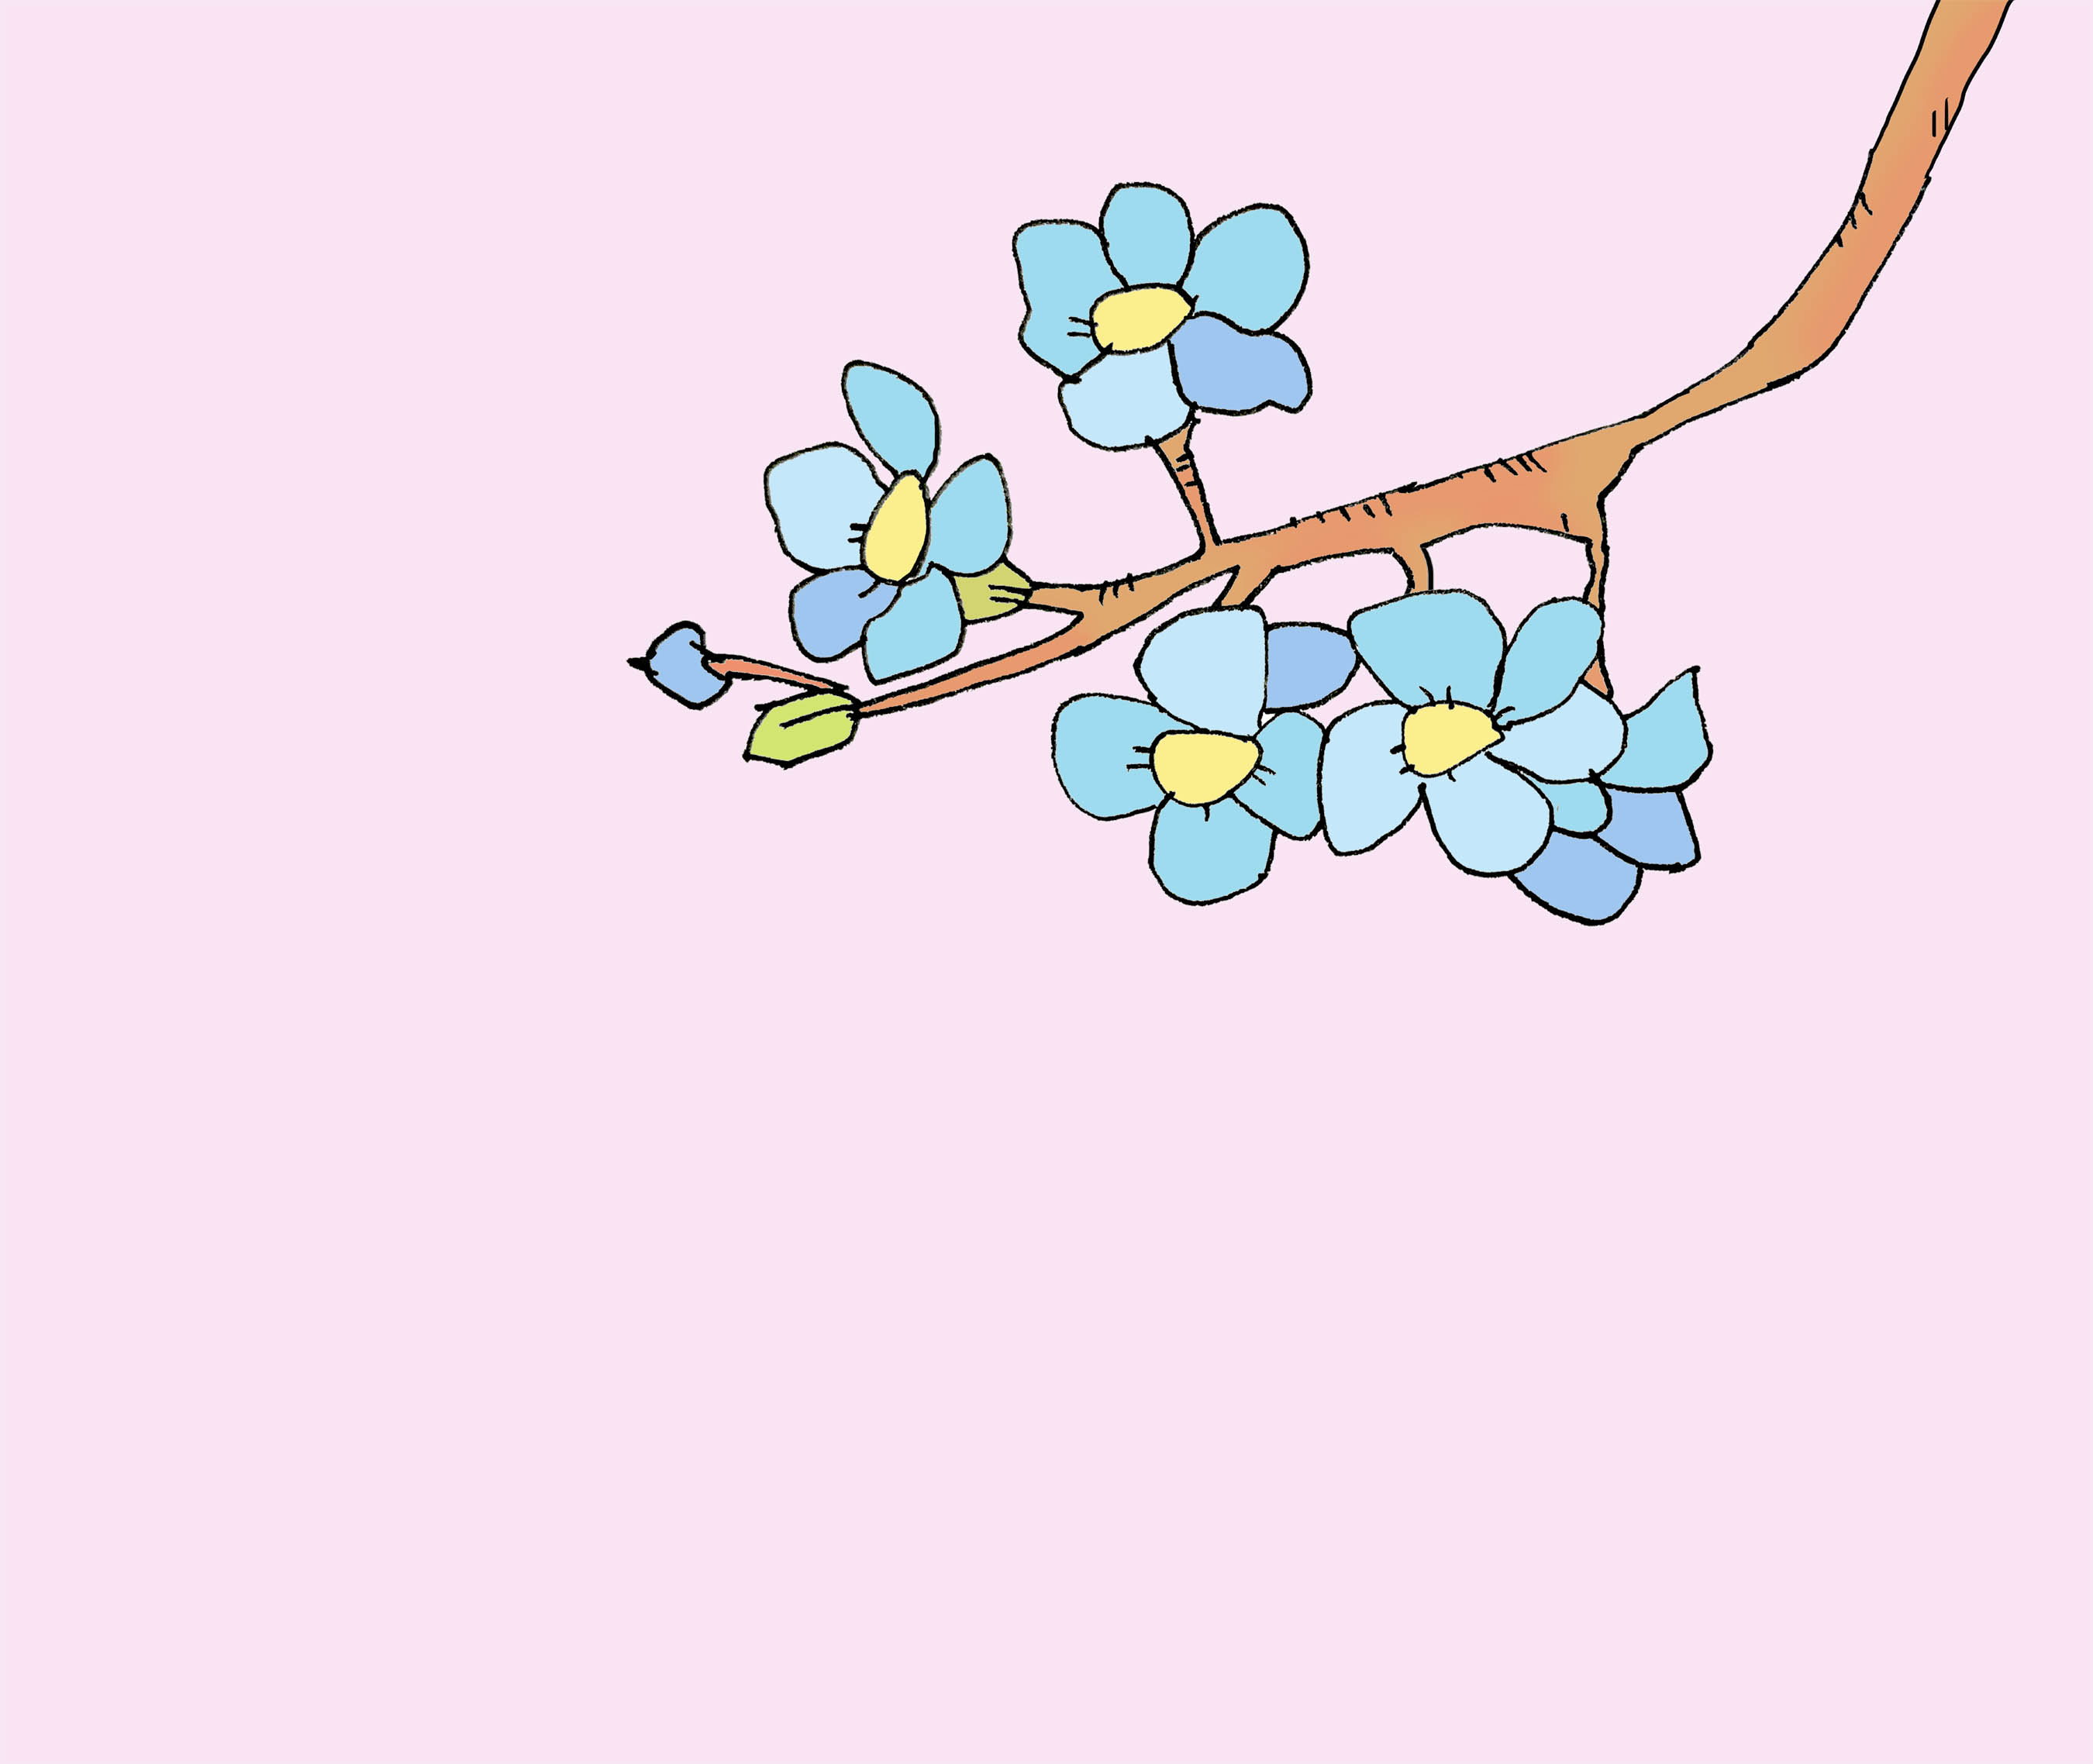 art every day number 516 / illustration / blue flowers